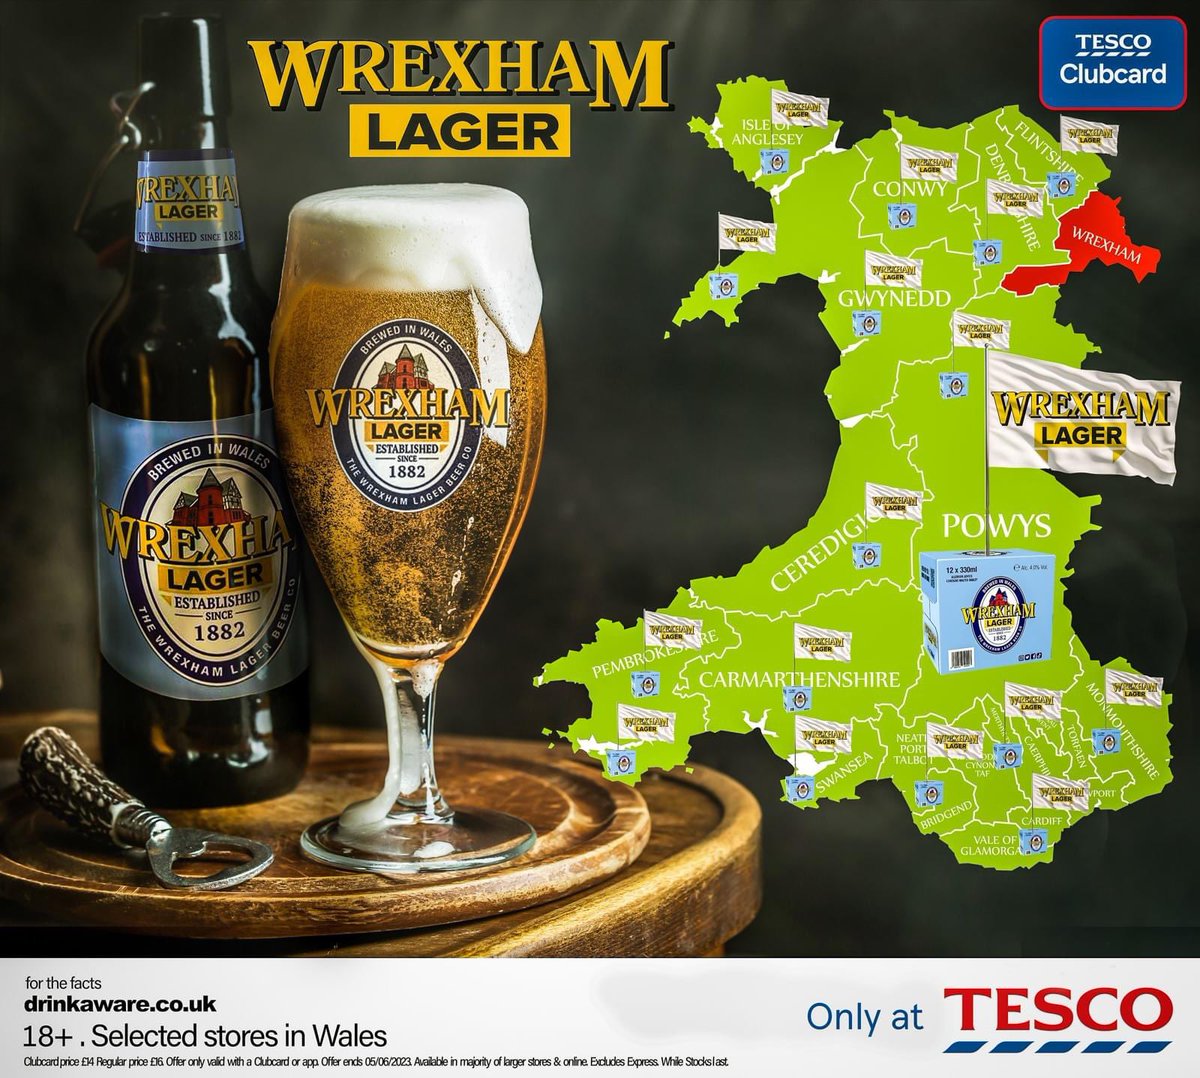 Clubcard deal alert ⚠️ Our Wrexham Lager 330ml 12 packs are now available from participating @Tesco stores across Wales at just £14 for Clubcard holders, available until 31st December. 🎁🏴󠁧󠁢󠁷󠁬󠁳󠁿